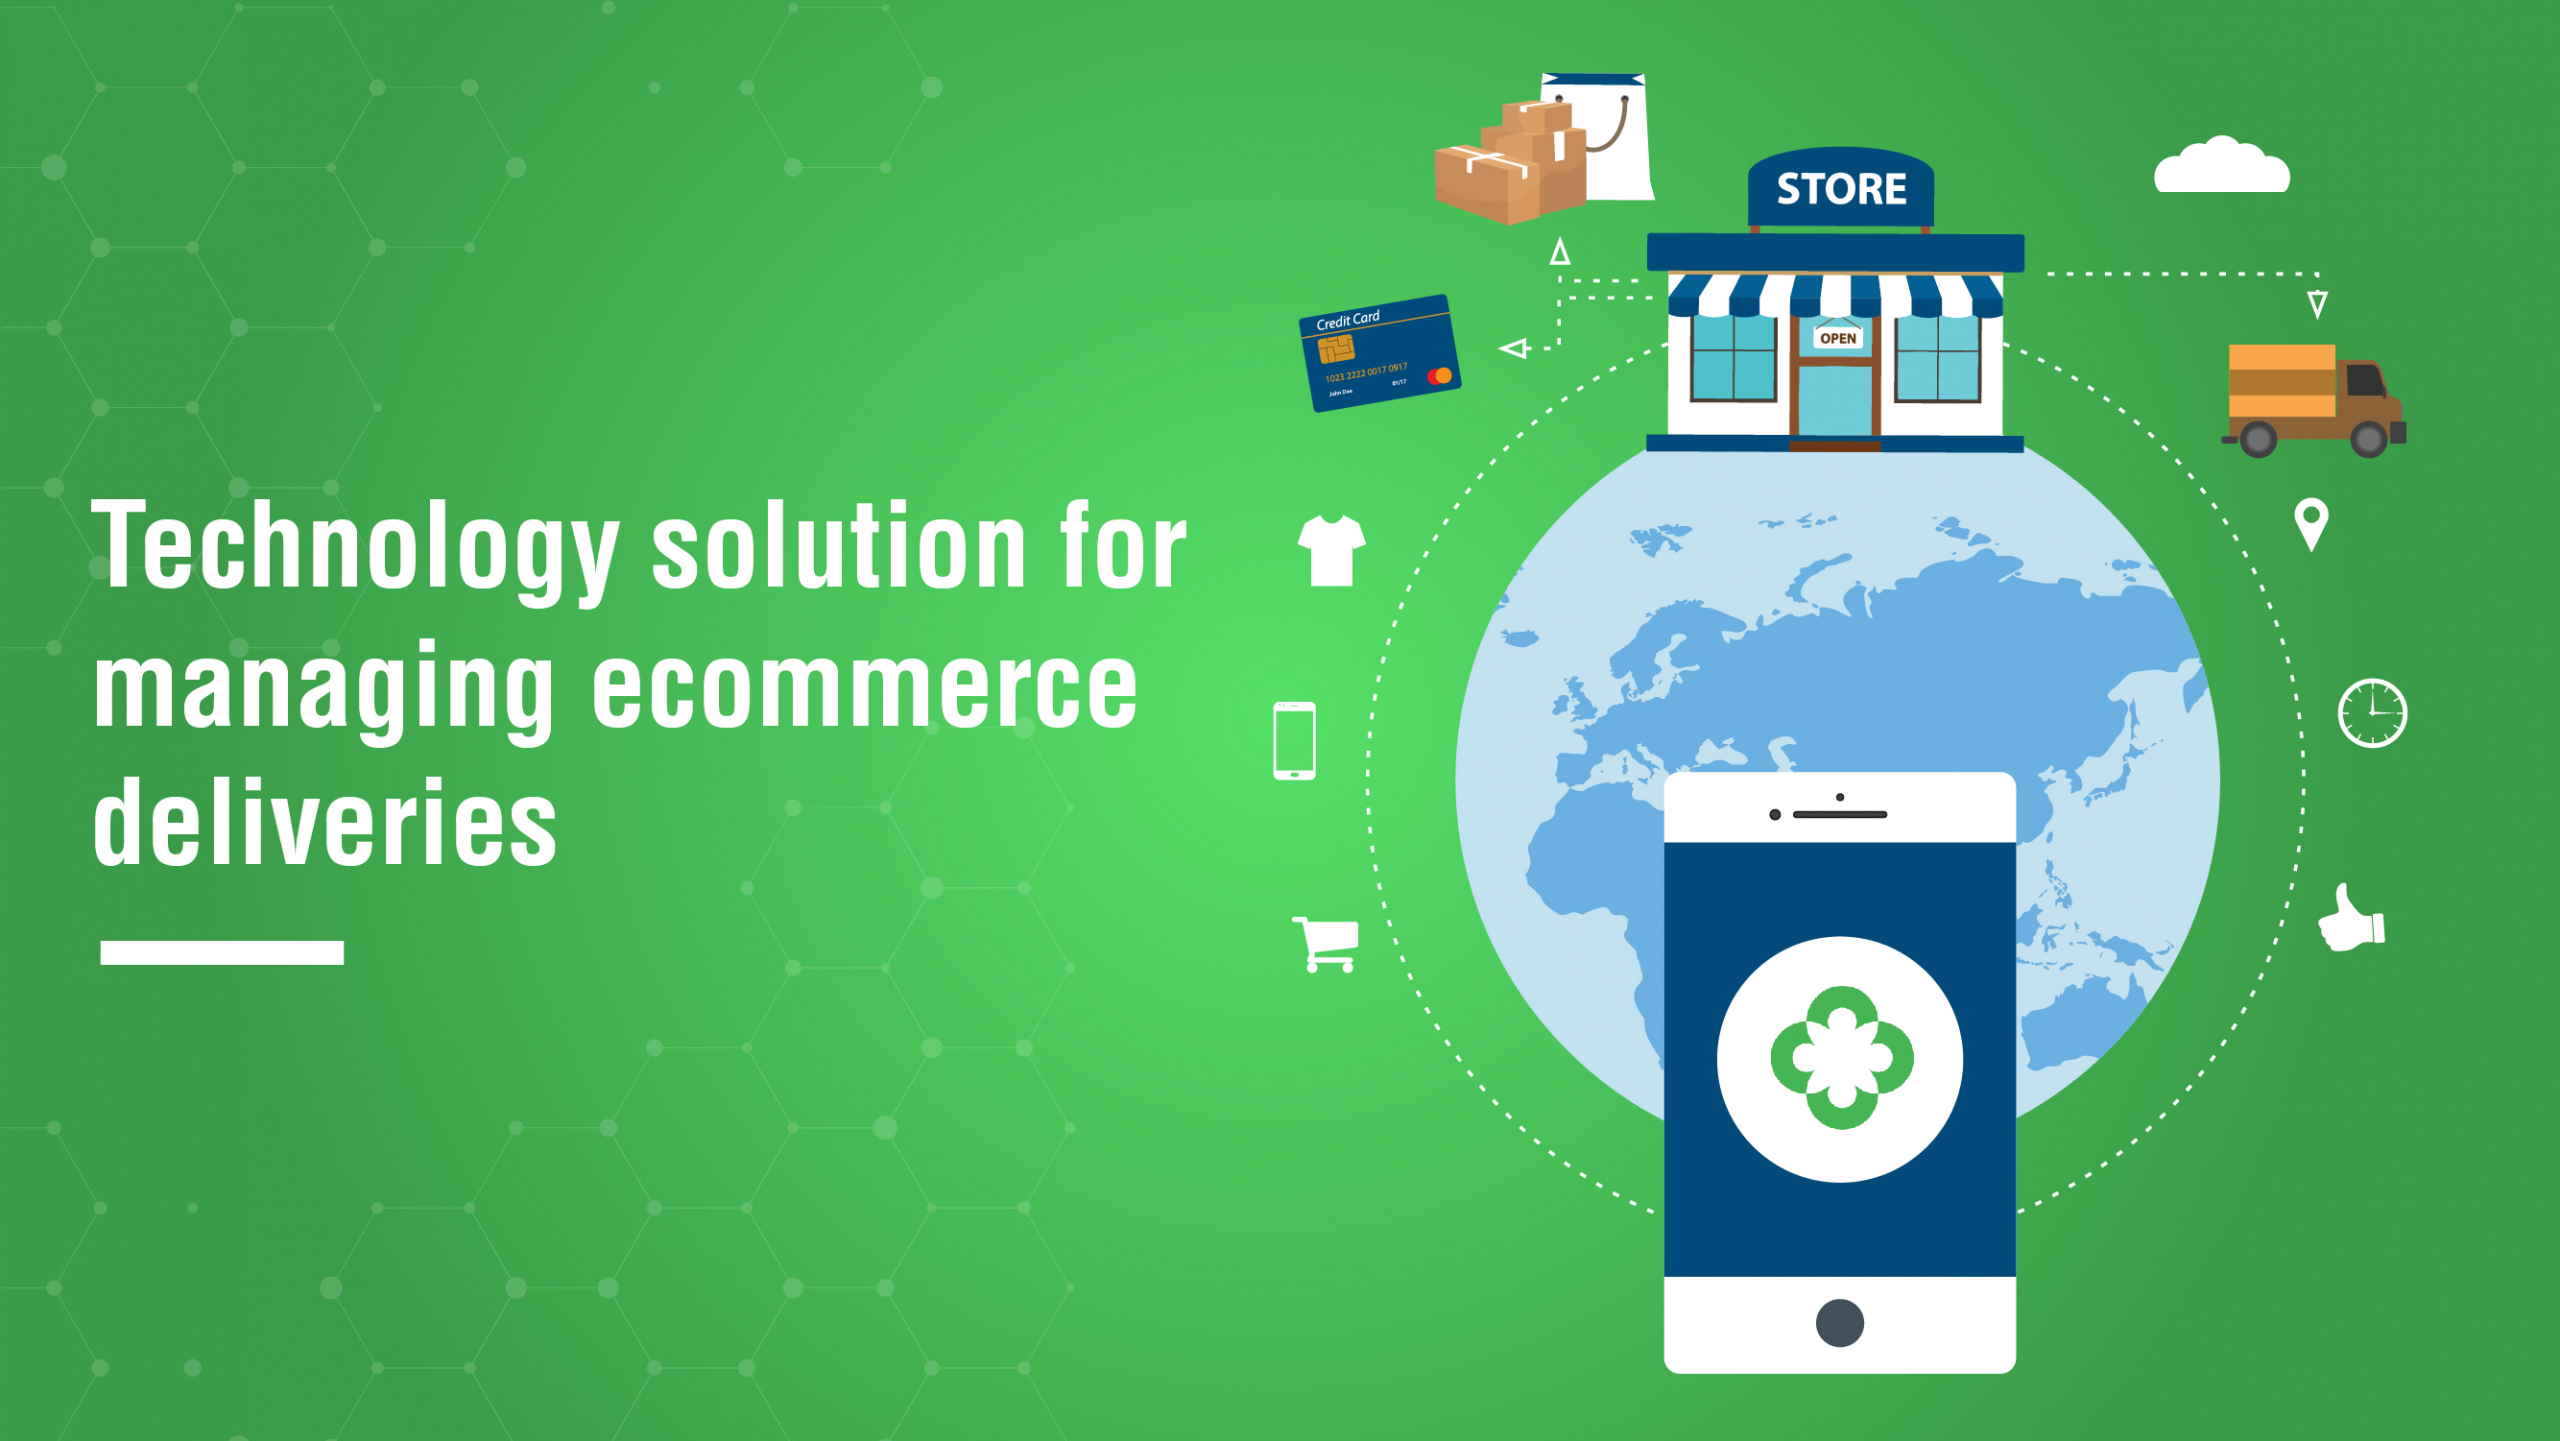 Technology solution for managing ecommerce deliveries